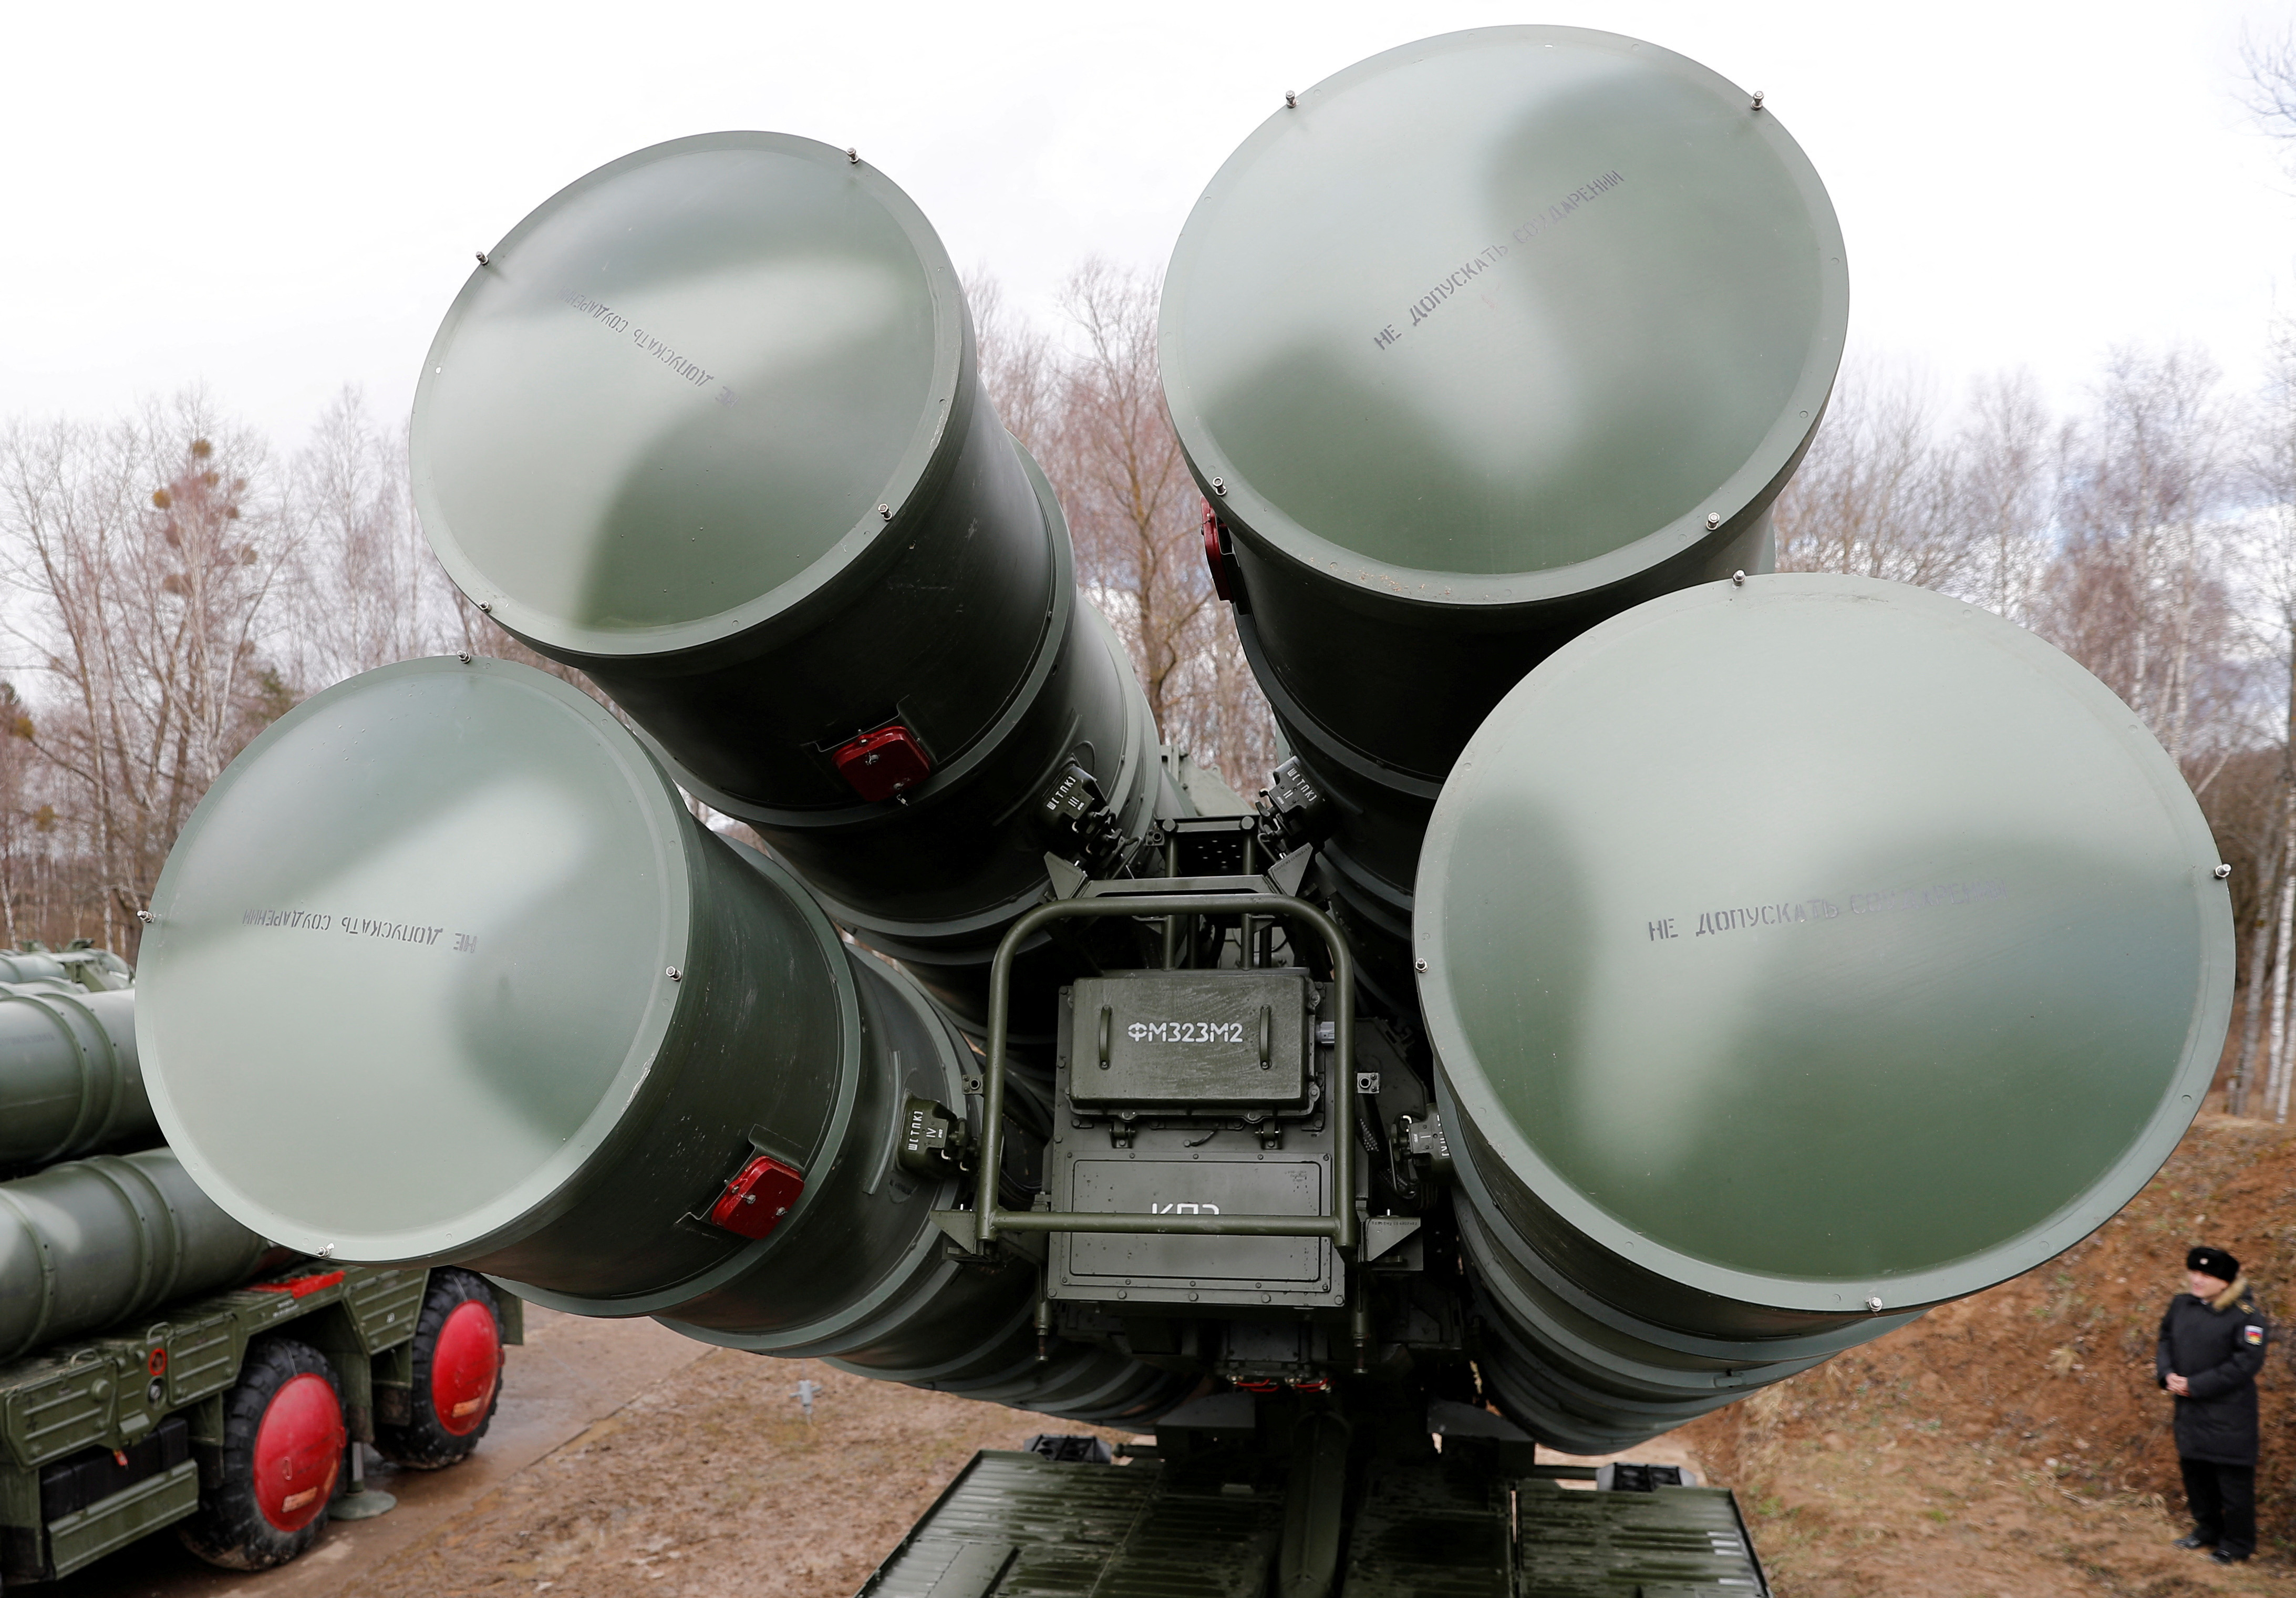 A view shows S-400 surface-to-air missile system after its deployment near Kaliningrad